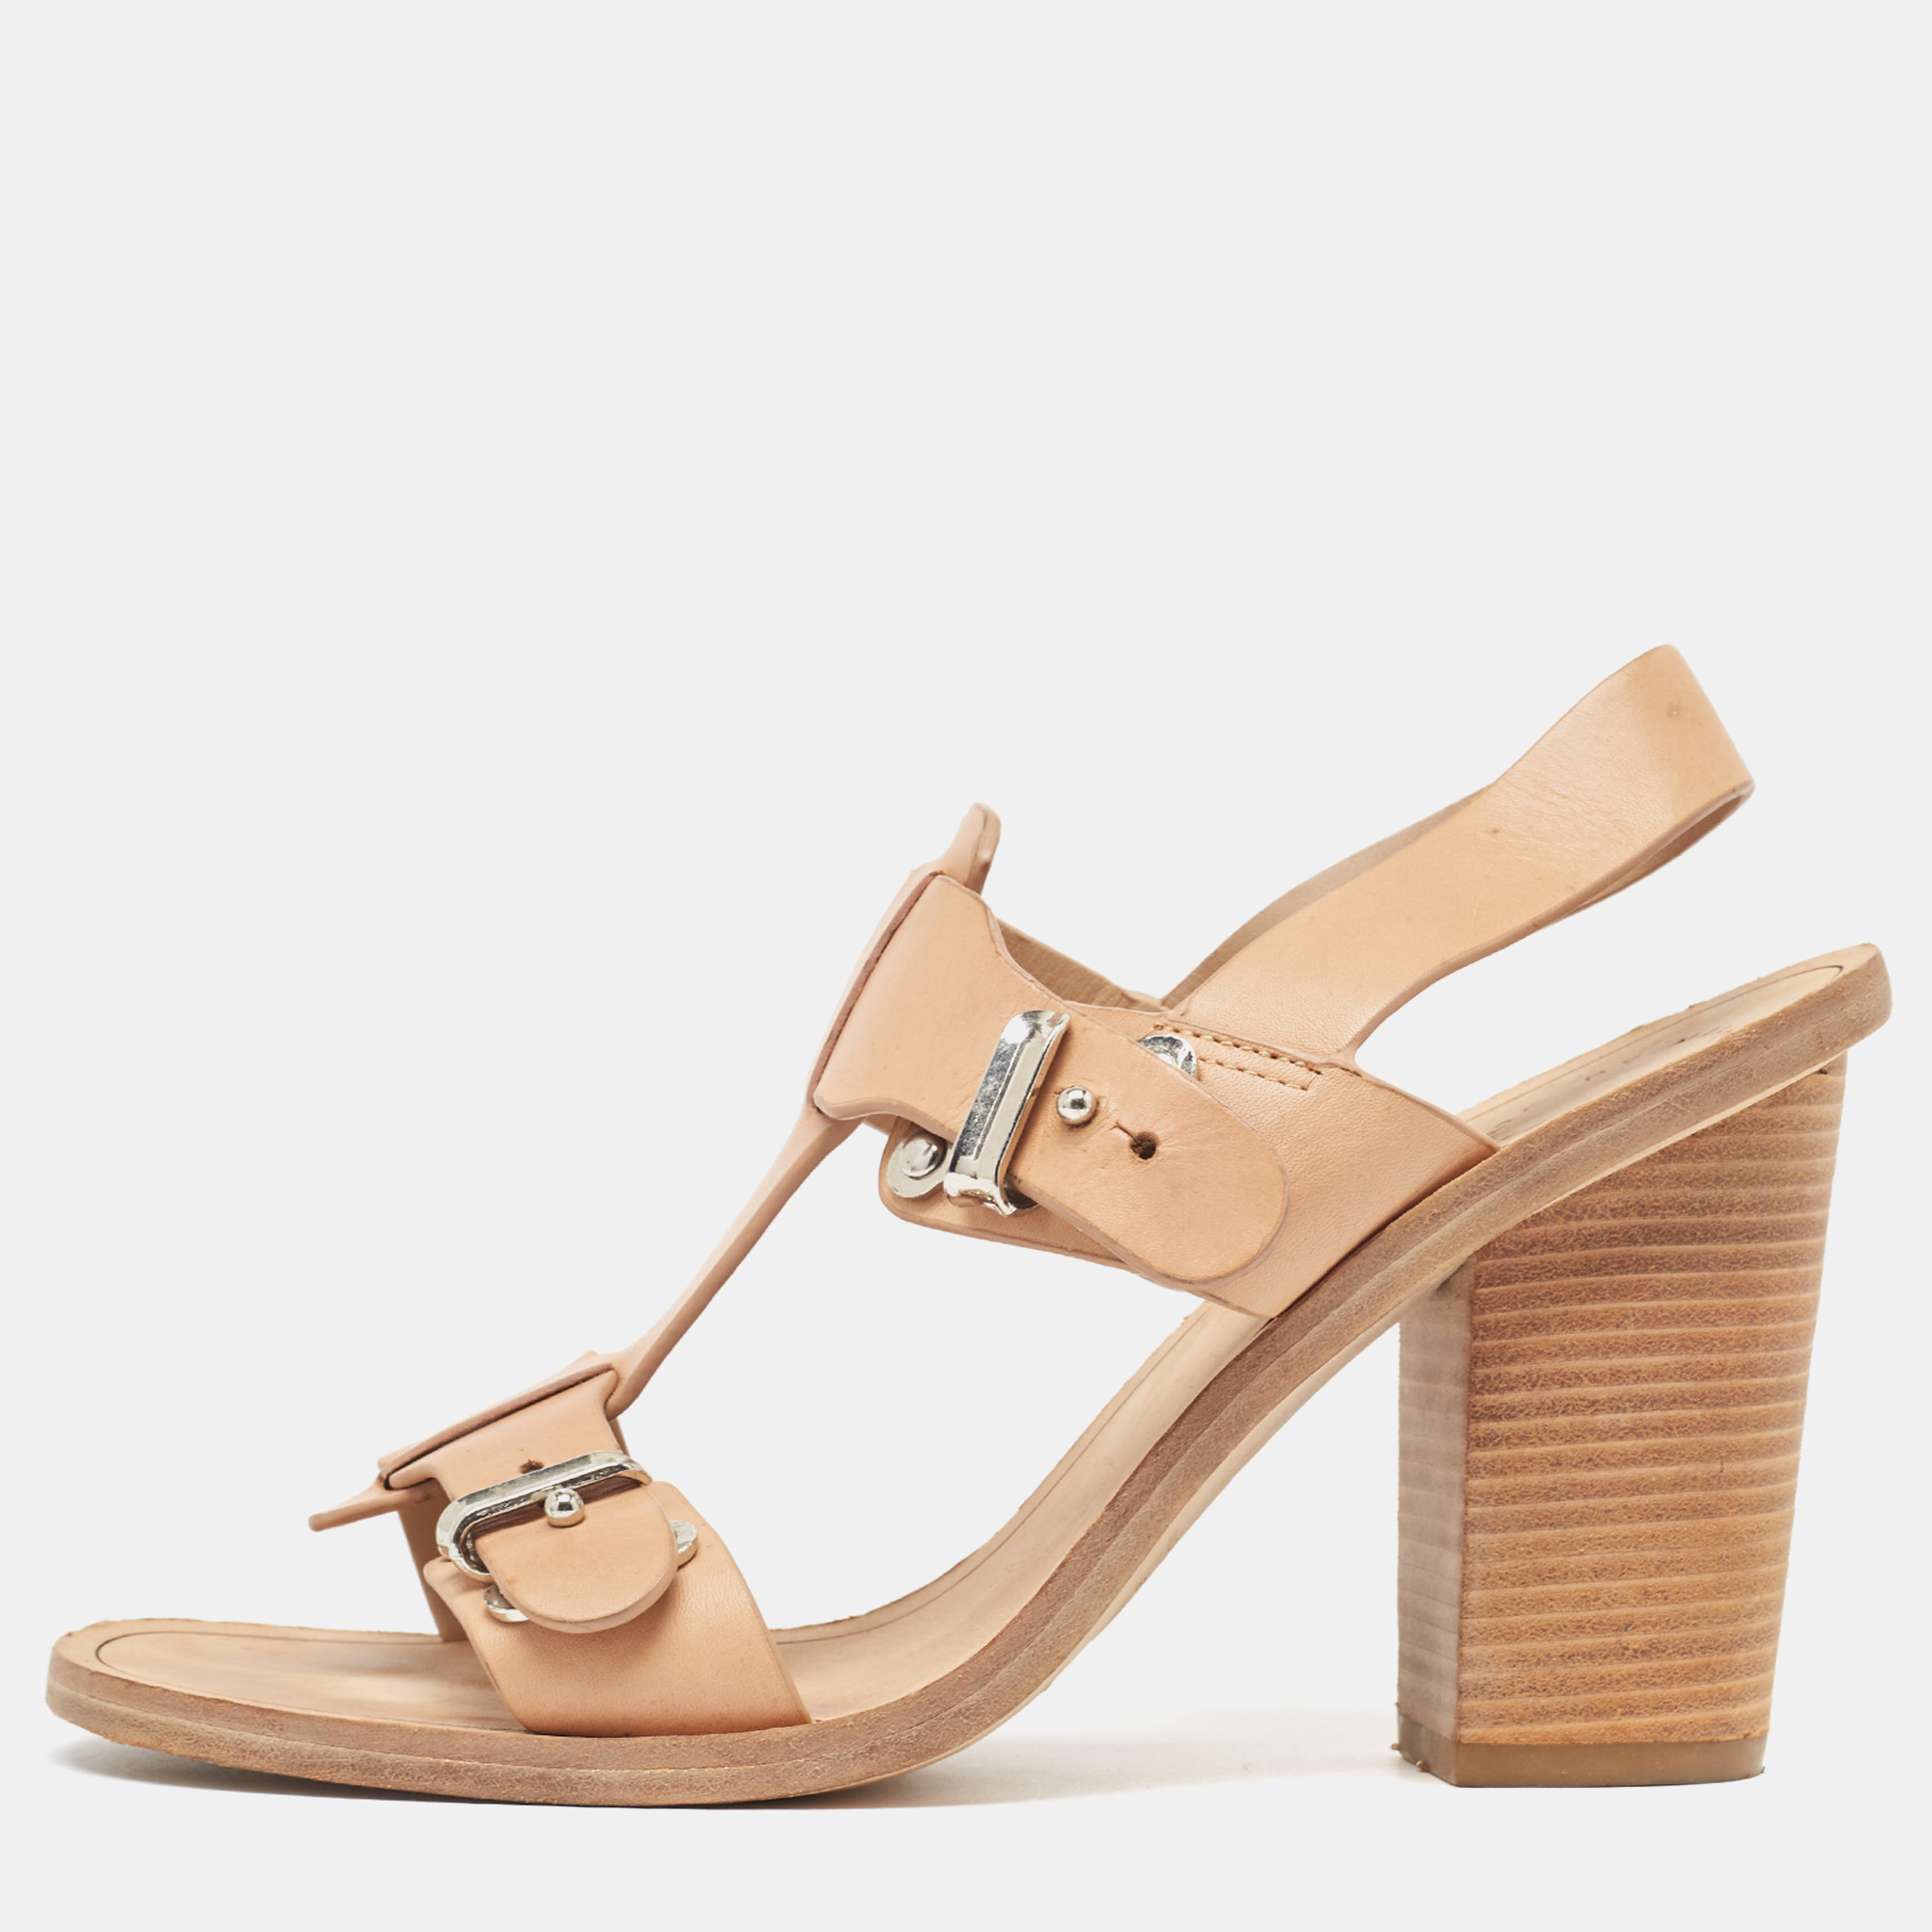 Marc by marc jacobs light brown leather slingback sandals size 37